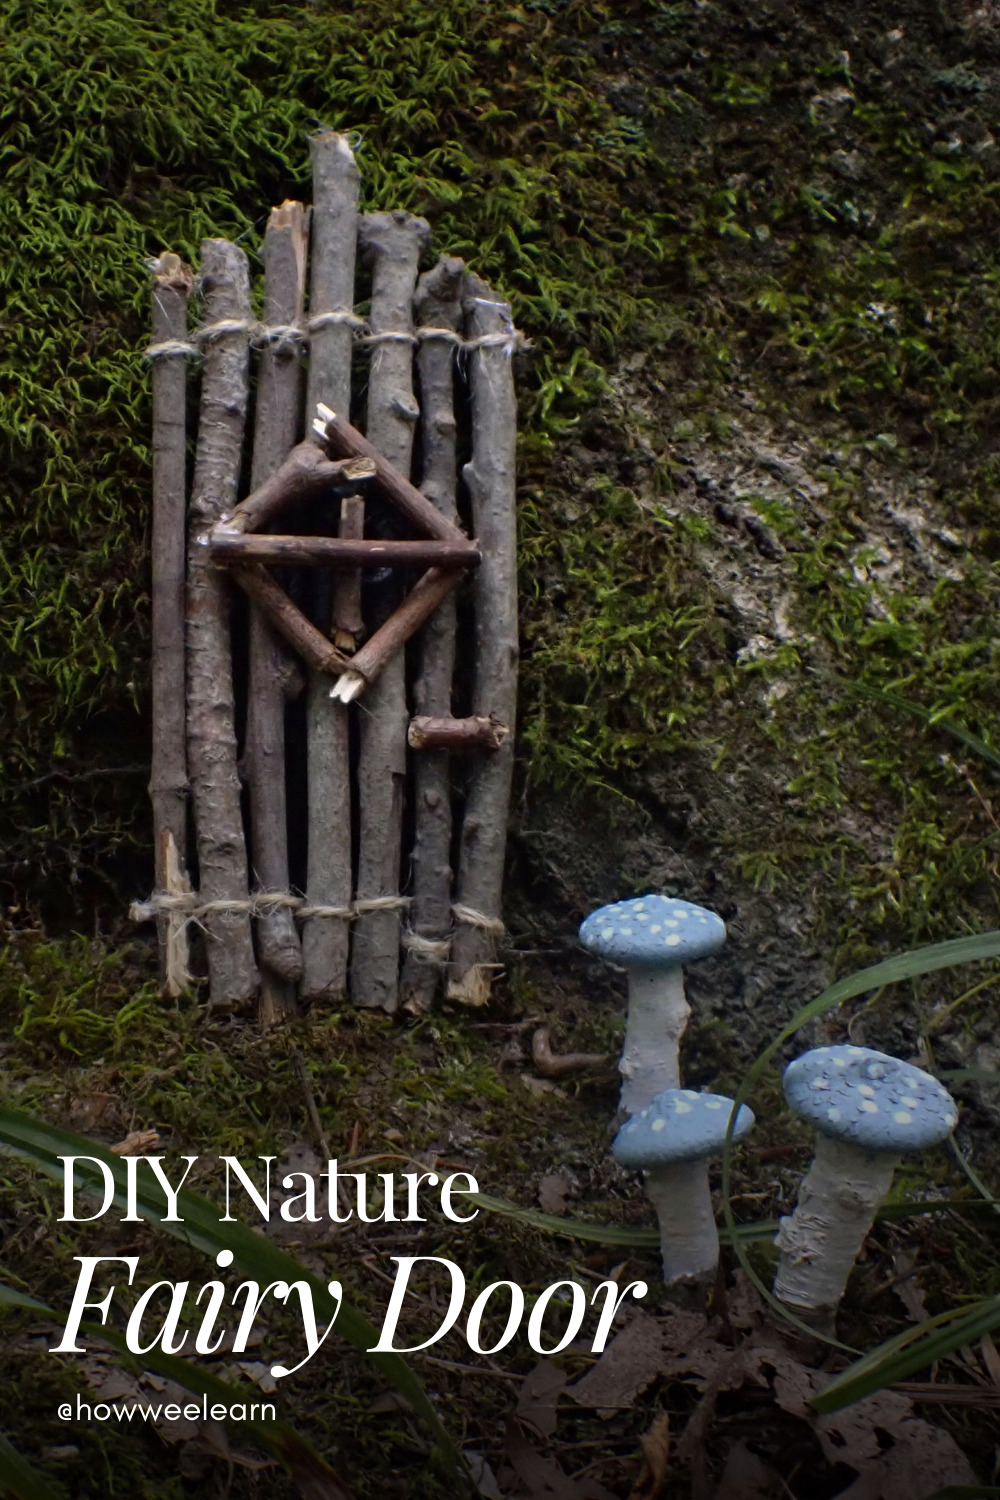 DIY Nature Fairy Door: How to make a fairy door from sticks and strings.